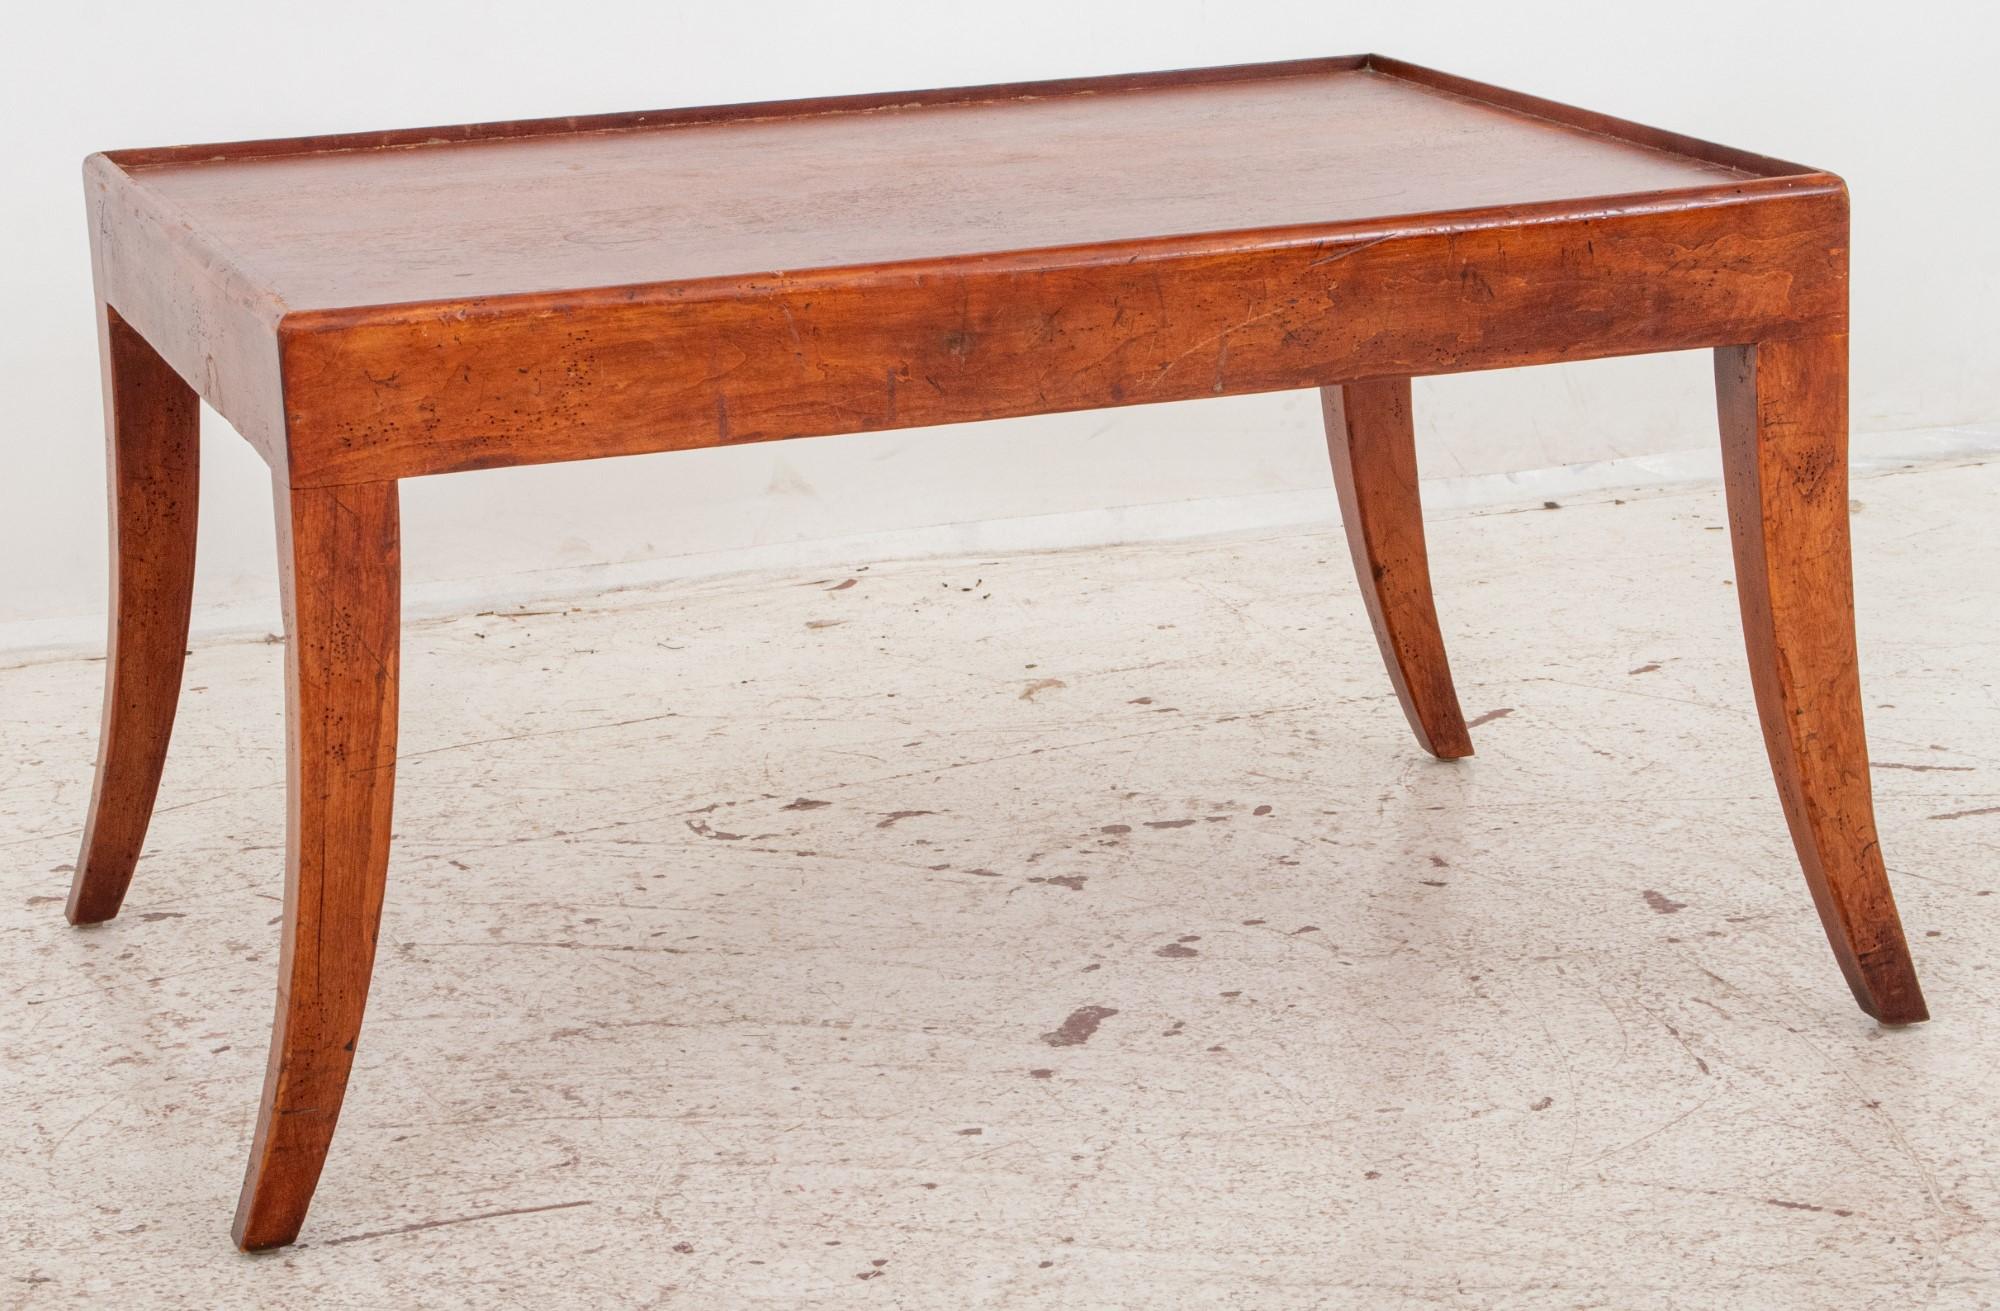 The dimensions for the Art Deco style walnut coffee table are:

Height: 17.5